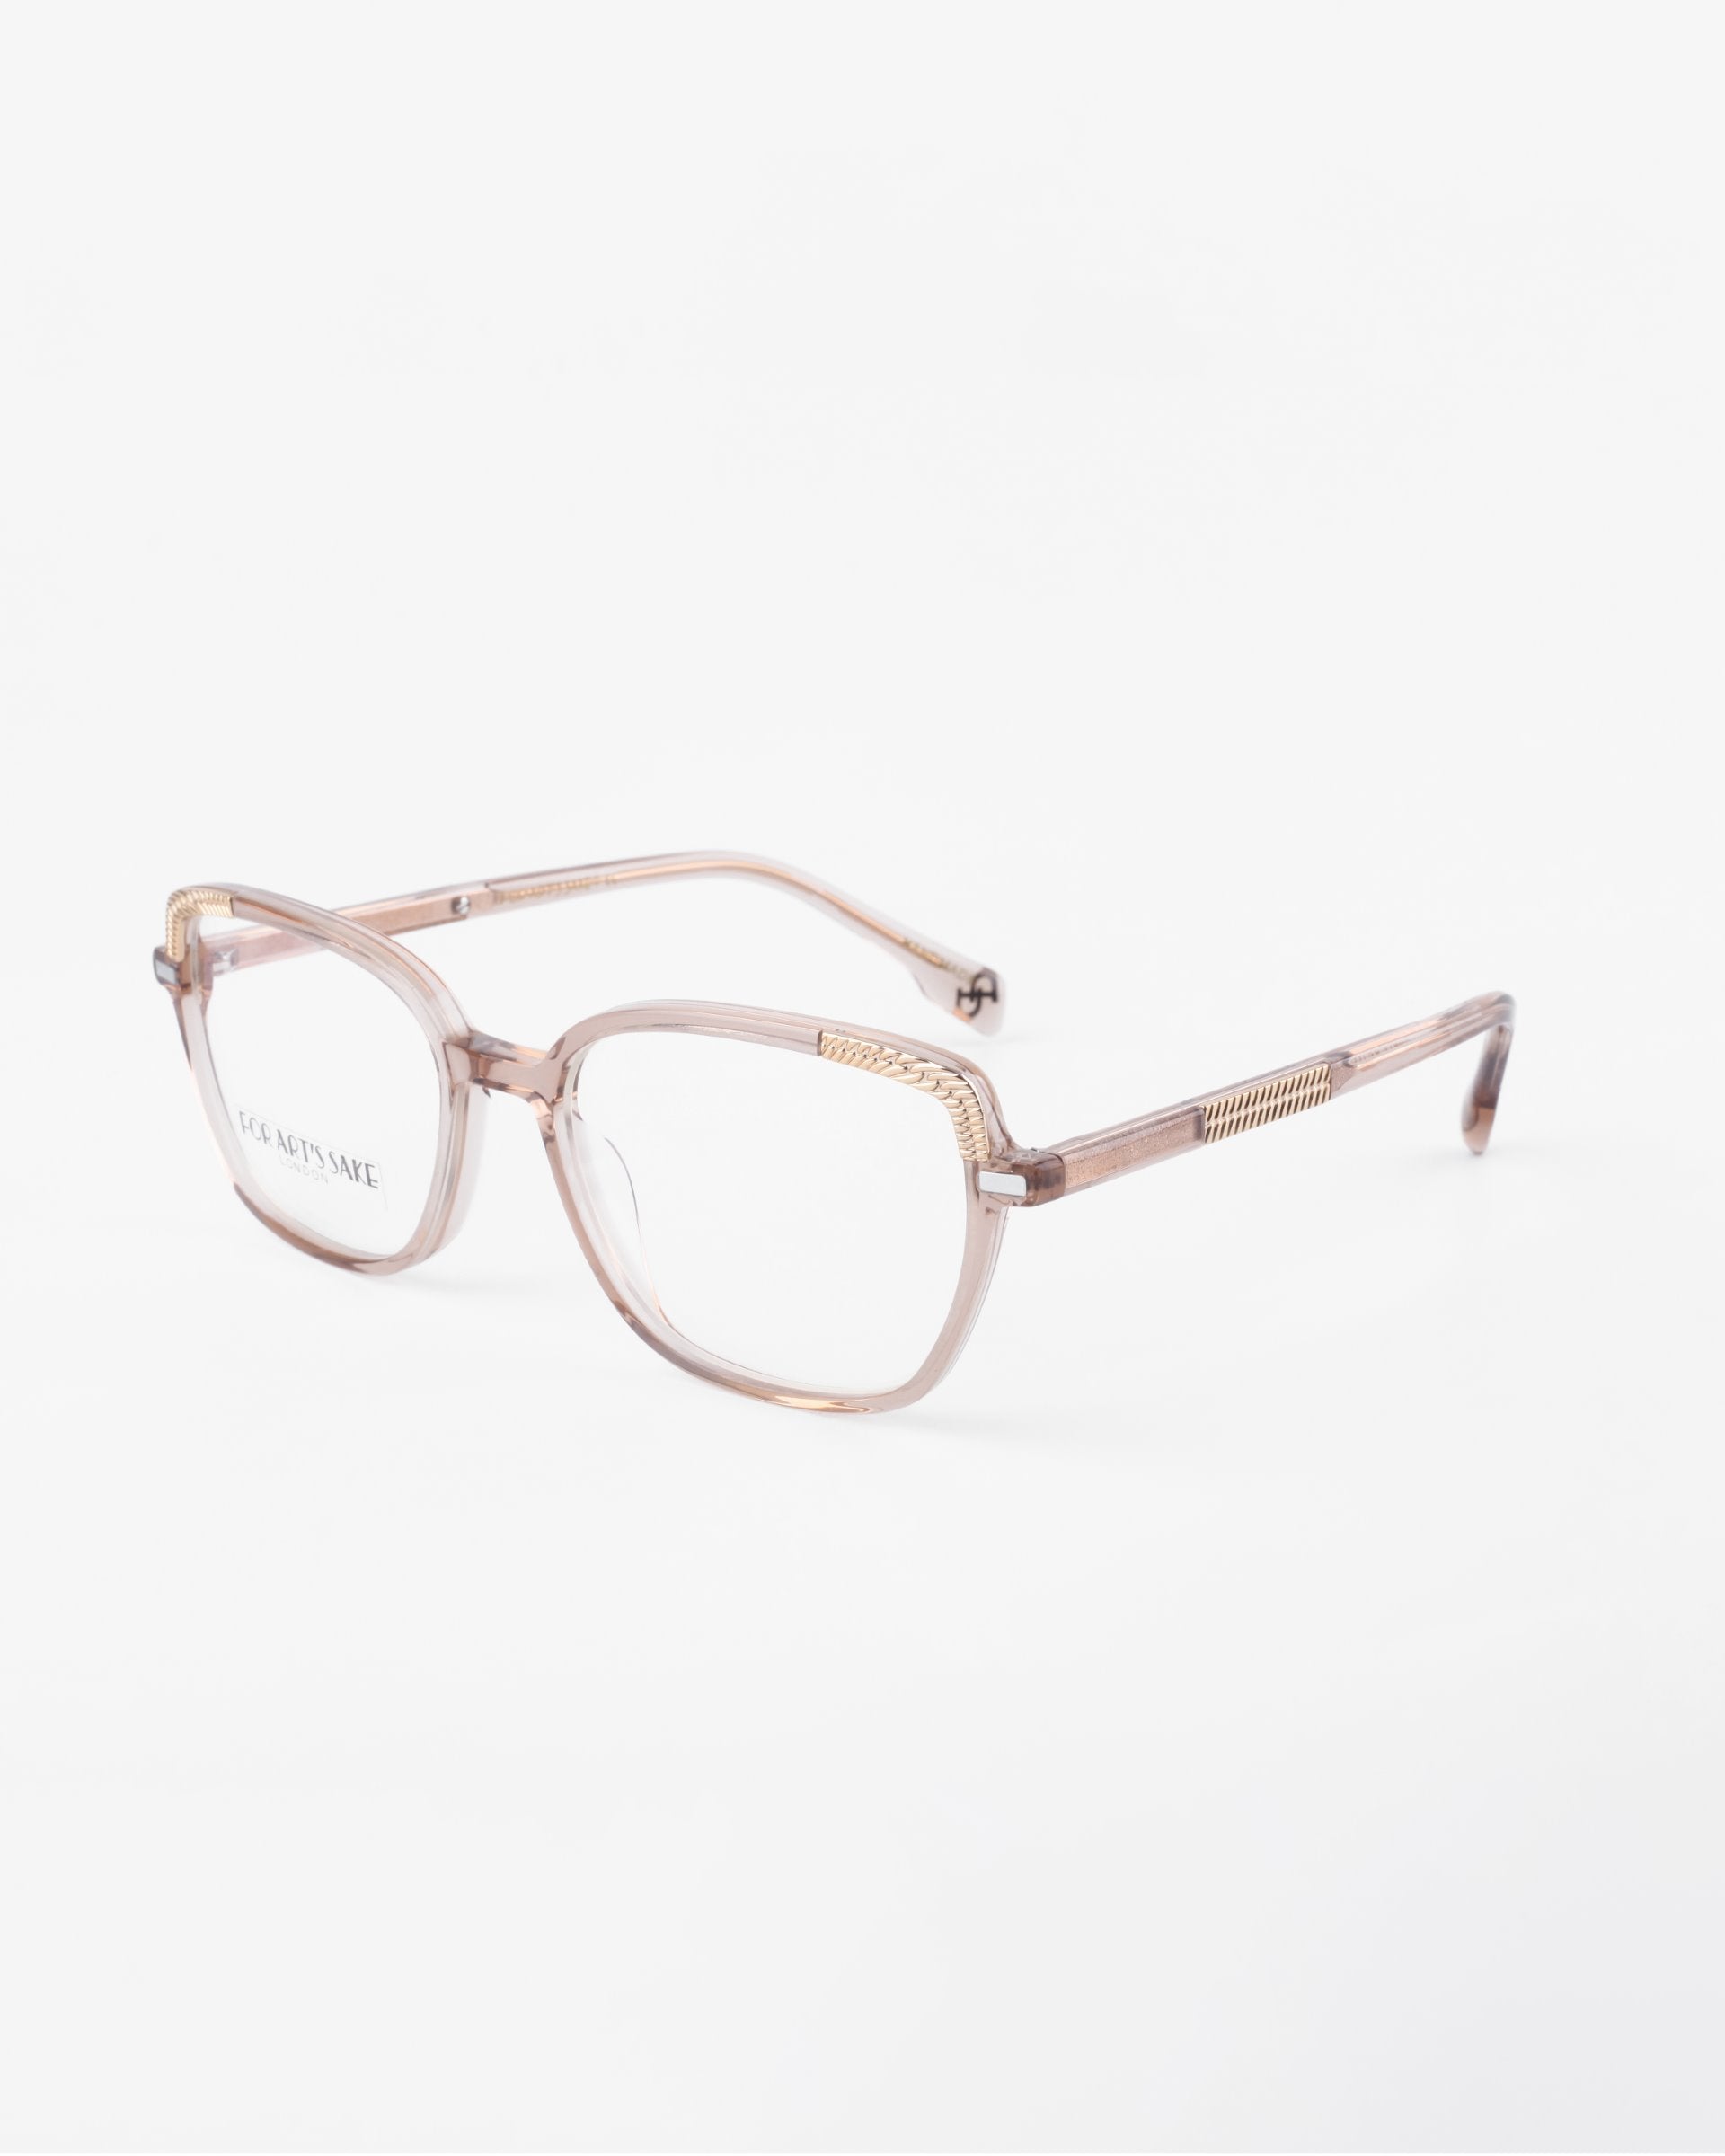 A pair of eyeglasses with a transparent pinkish-brown frame. The lenses feature a blue light filter, and the arms have a subtle golden detail near the hinges. The Mimosa by For Art's Sake®, with their gold-plated frames, are set against a plain white background.